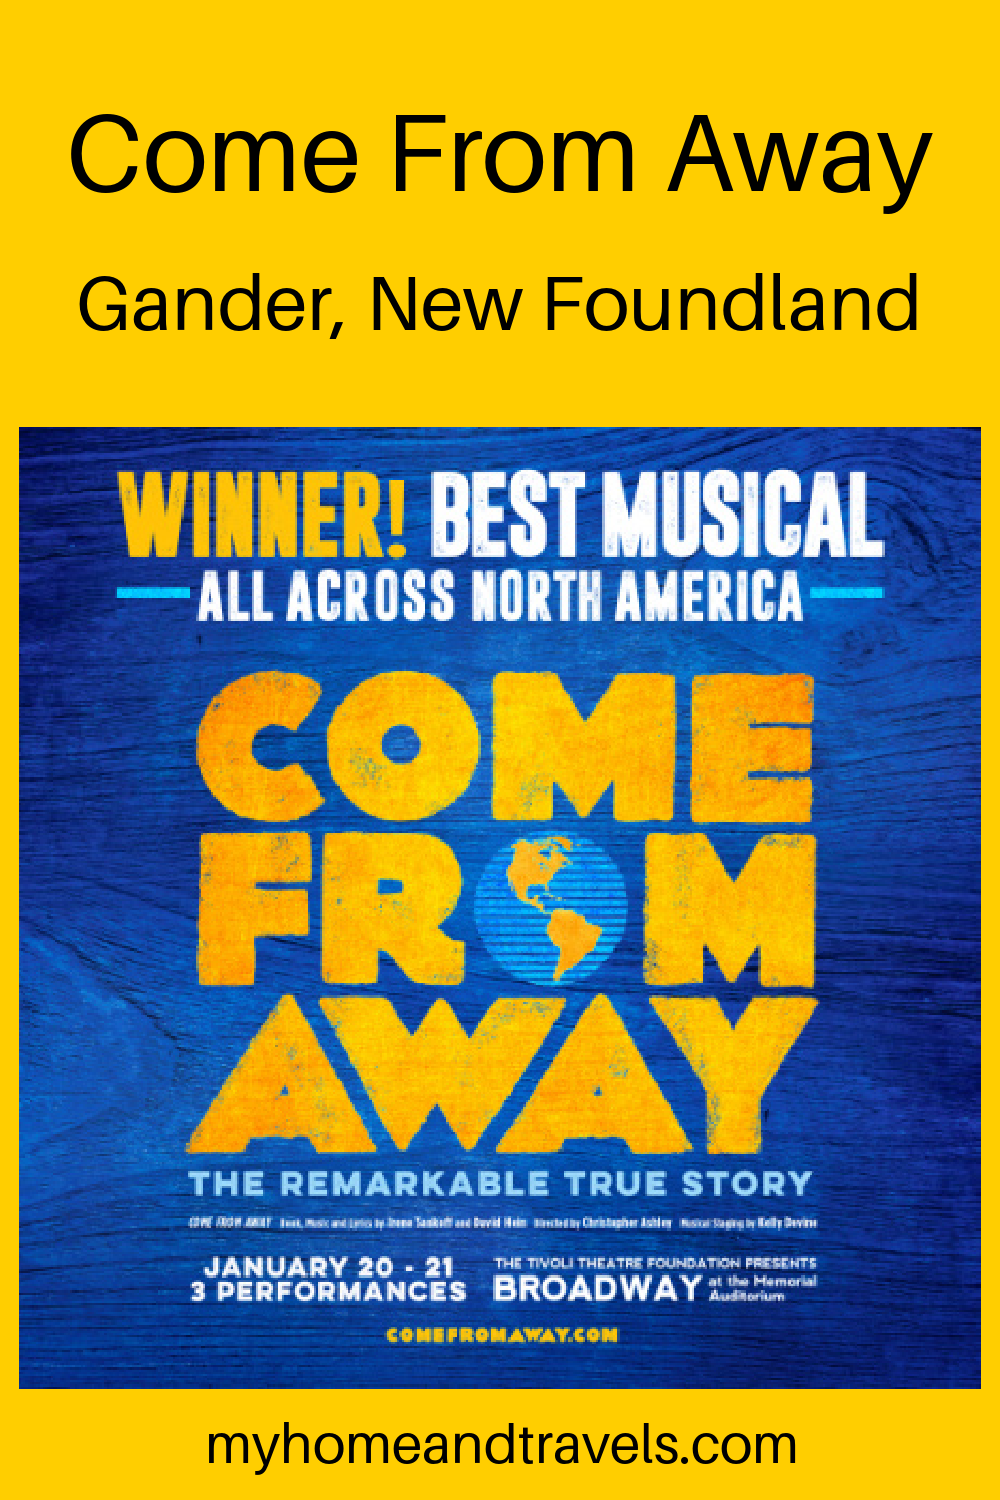 Come From Away A Musical Production about Gander, Newfoundland My